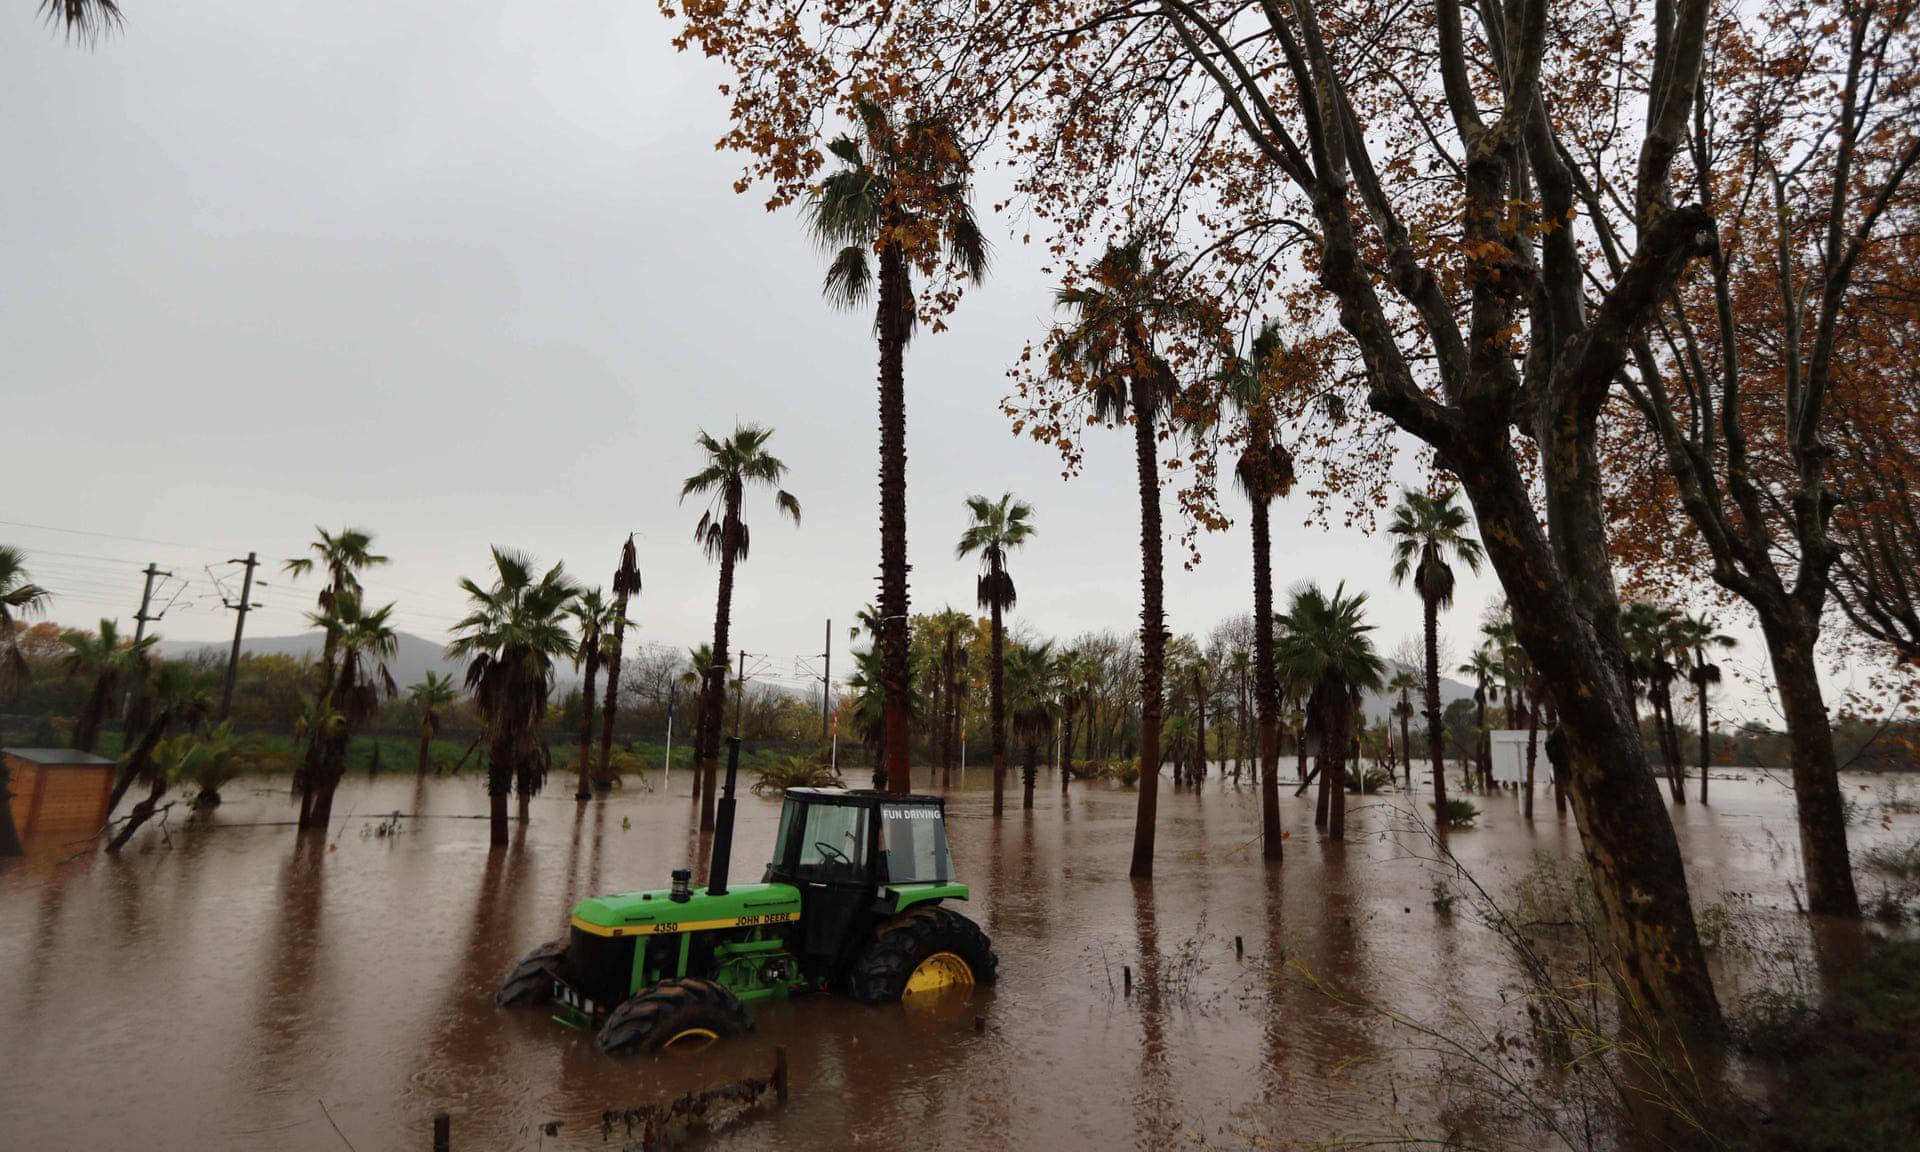 A tractor in a flooded area after heavy rain in Roquebrune-sur-Argens, France